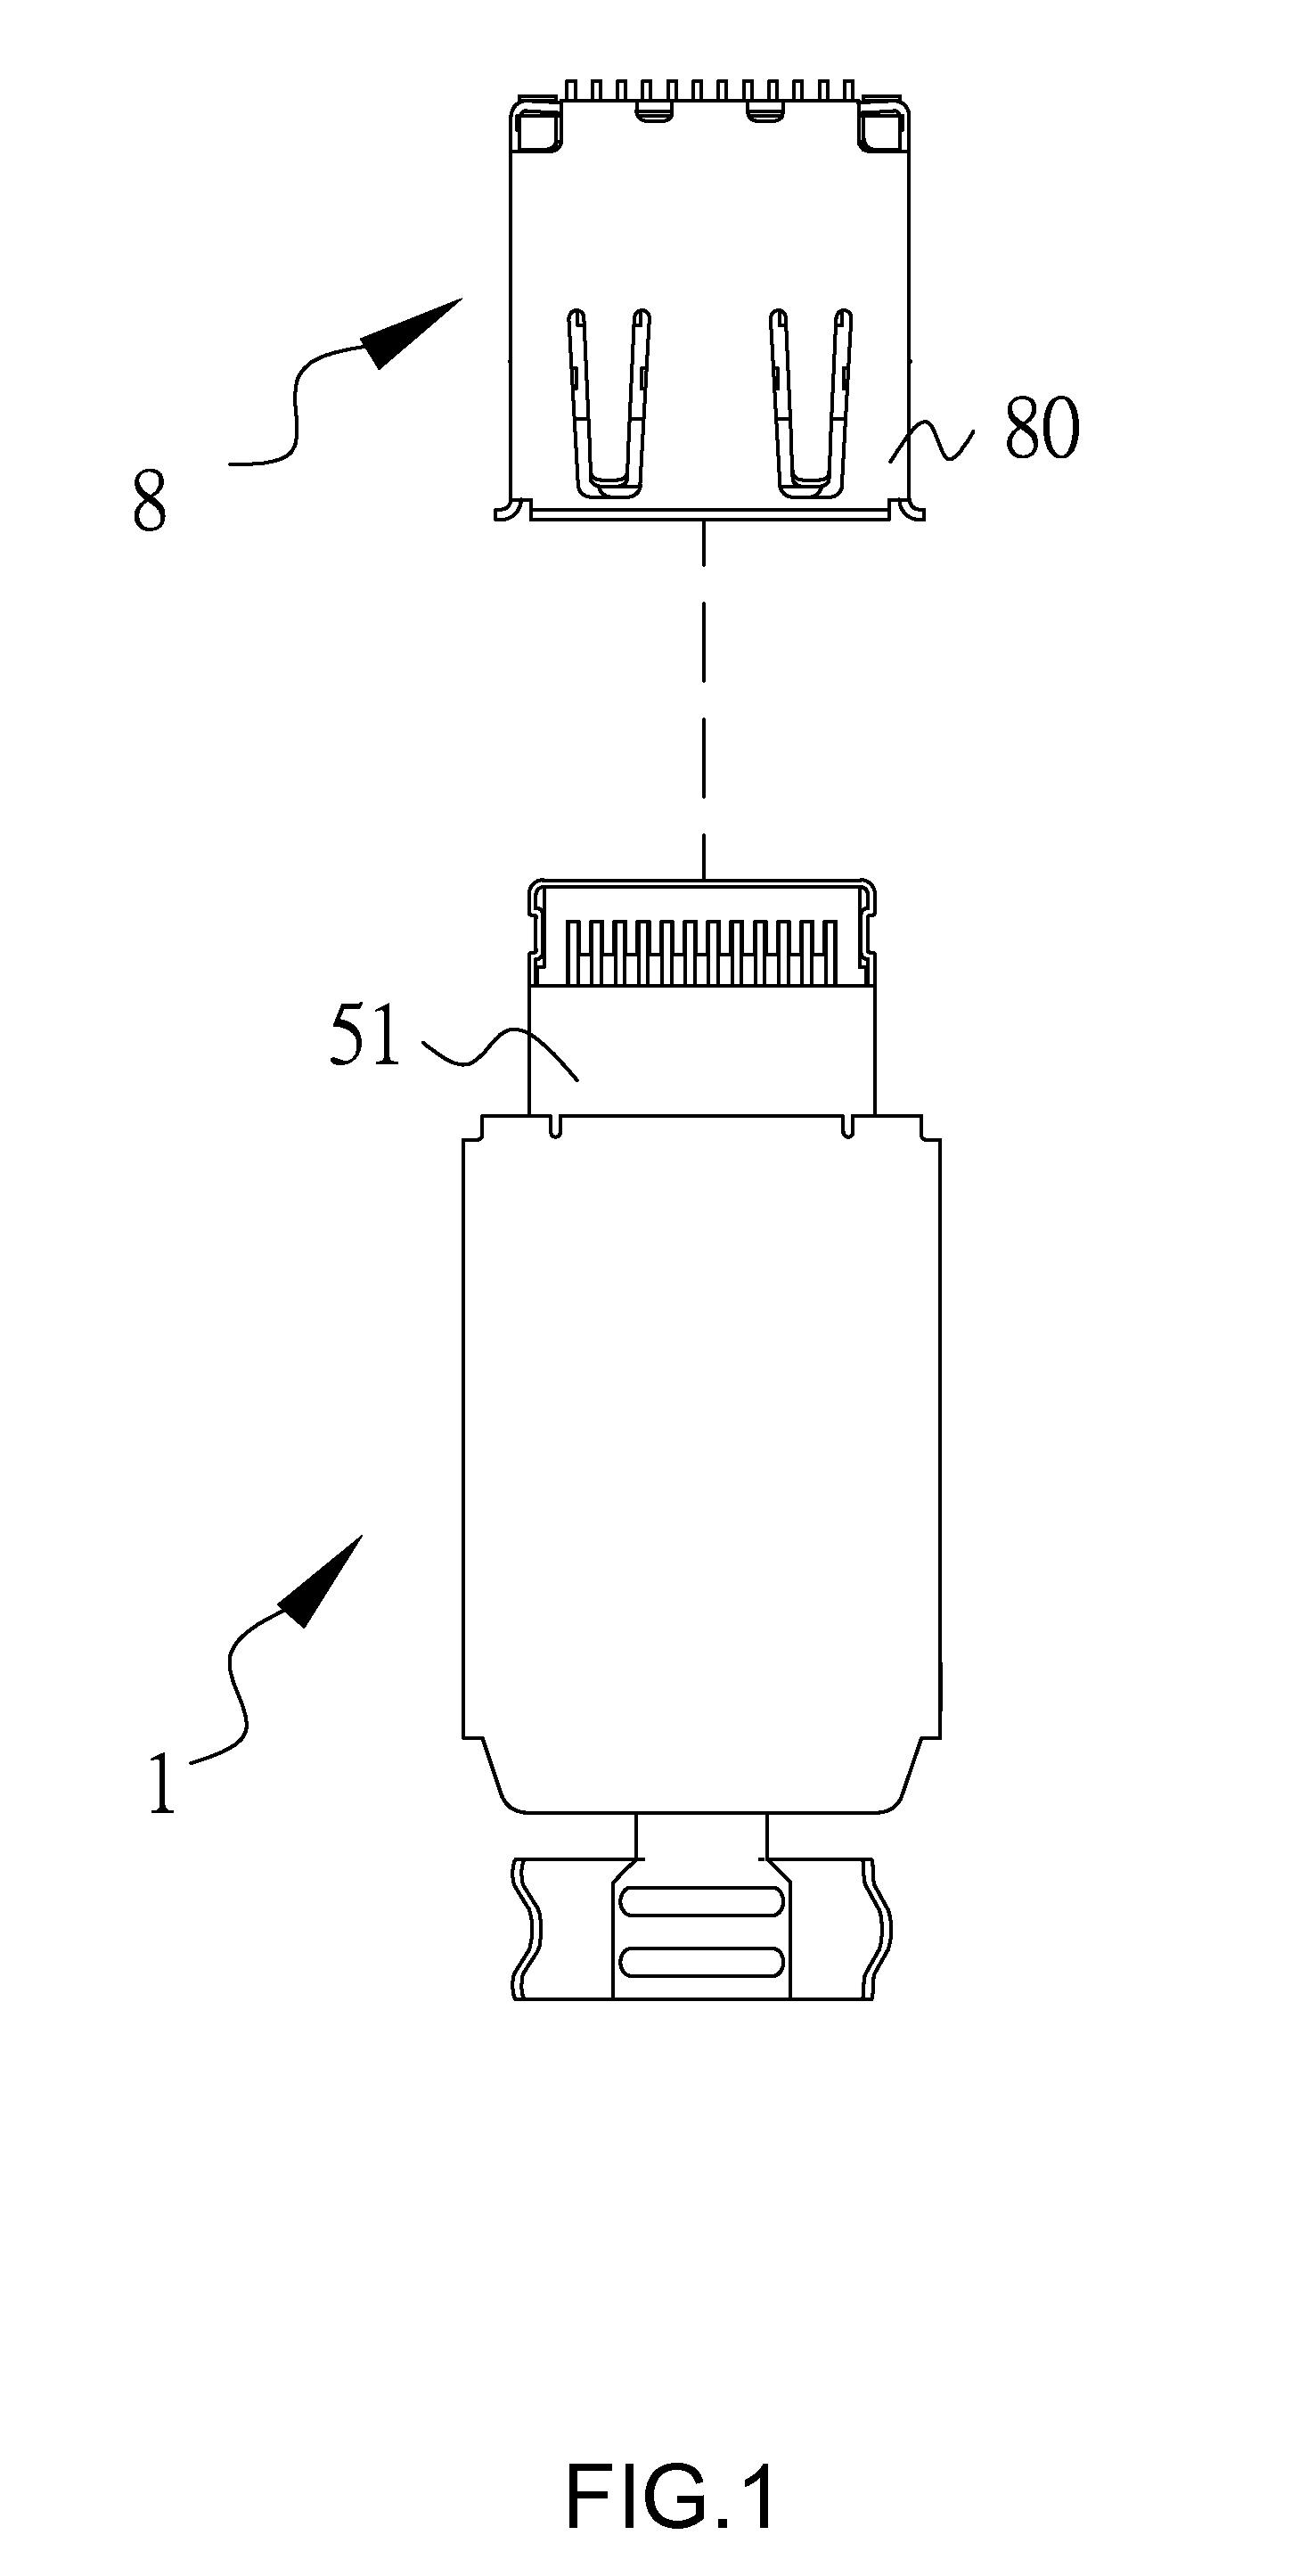 Electrical connector plug having a metallic shield connected to an electrically conductive housing of the plug